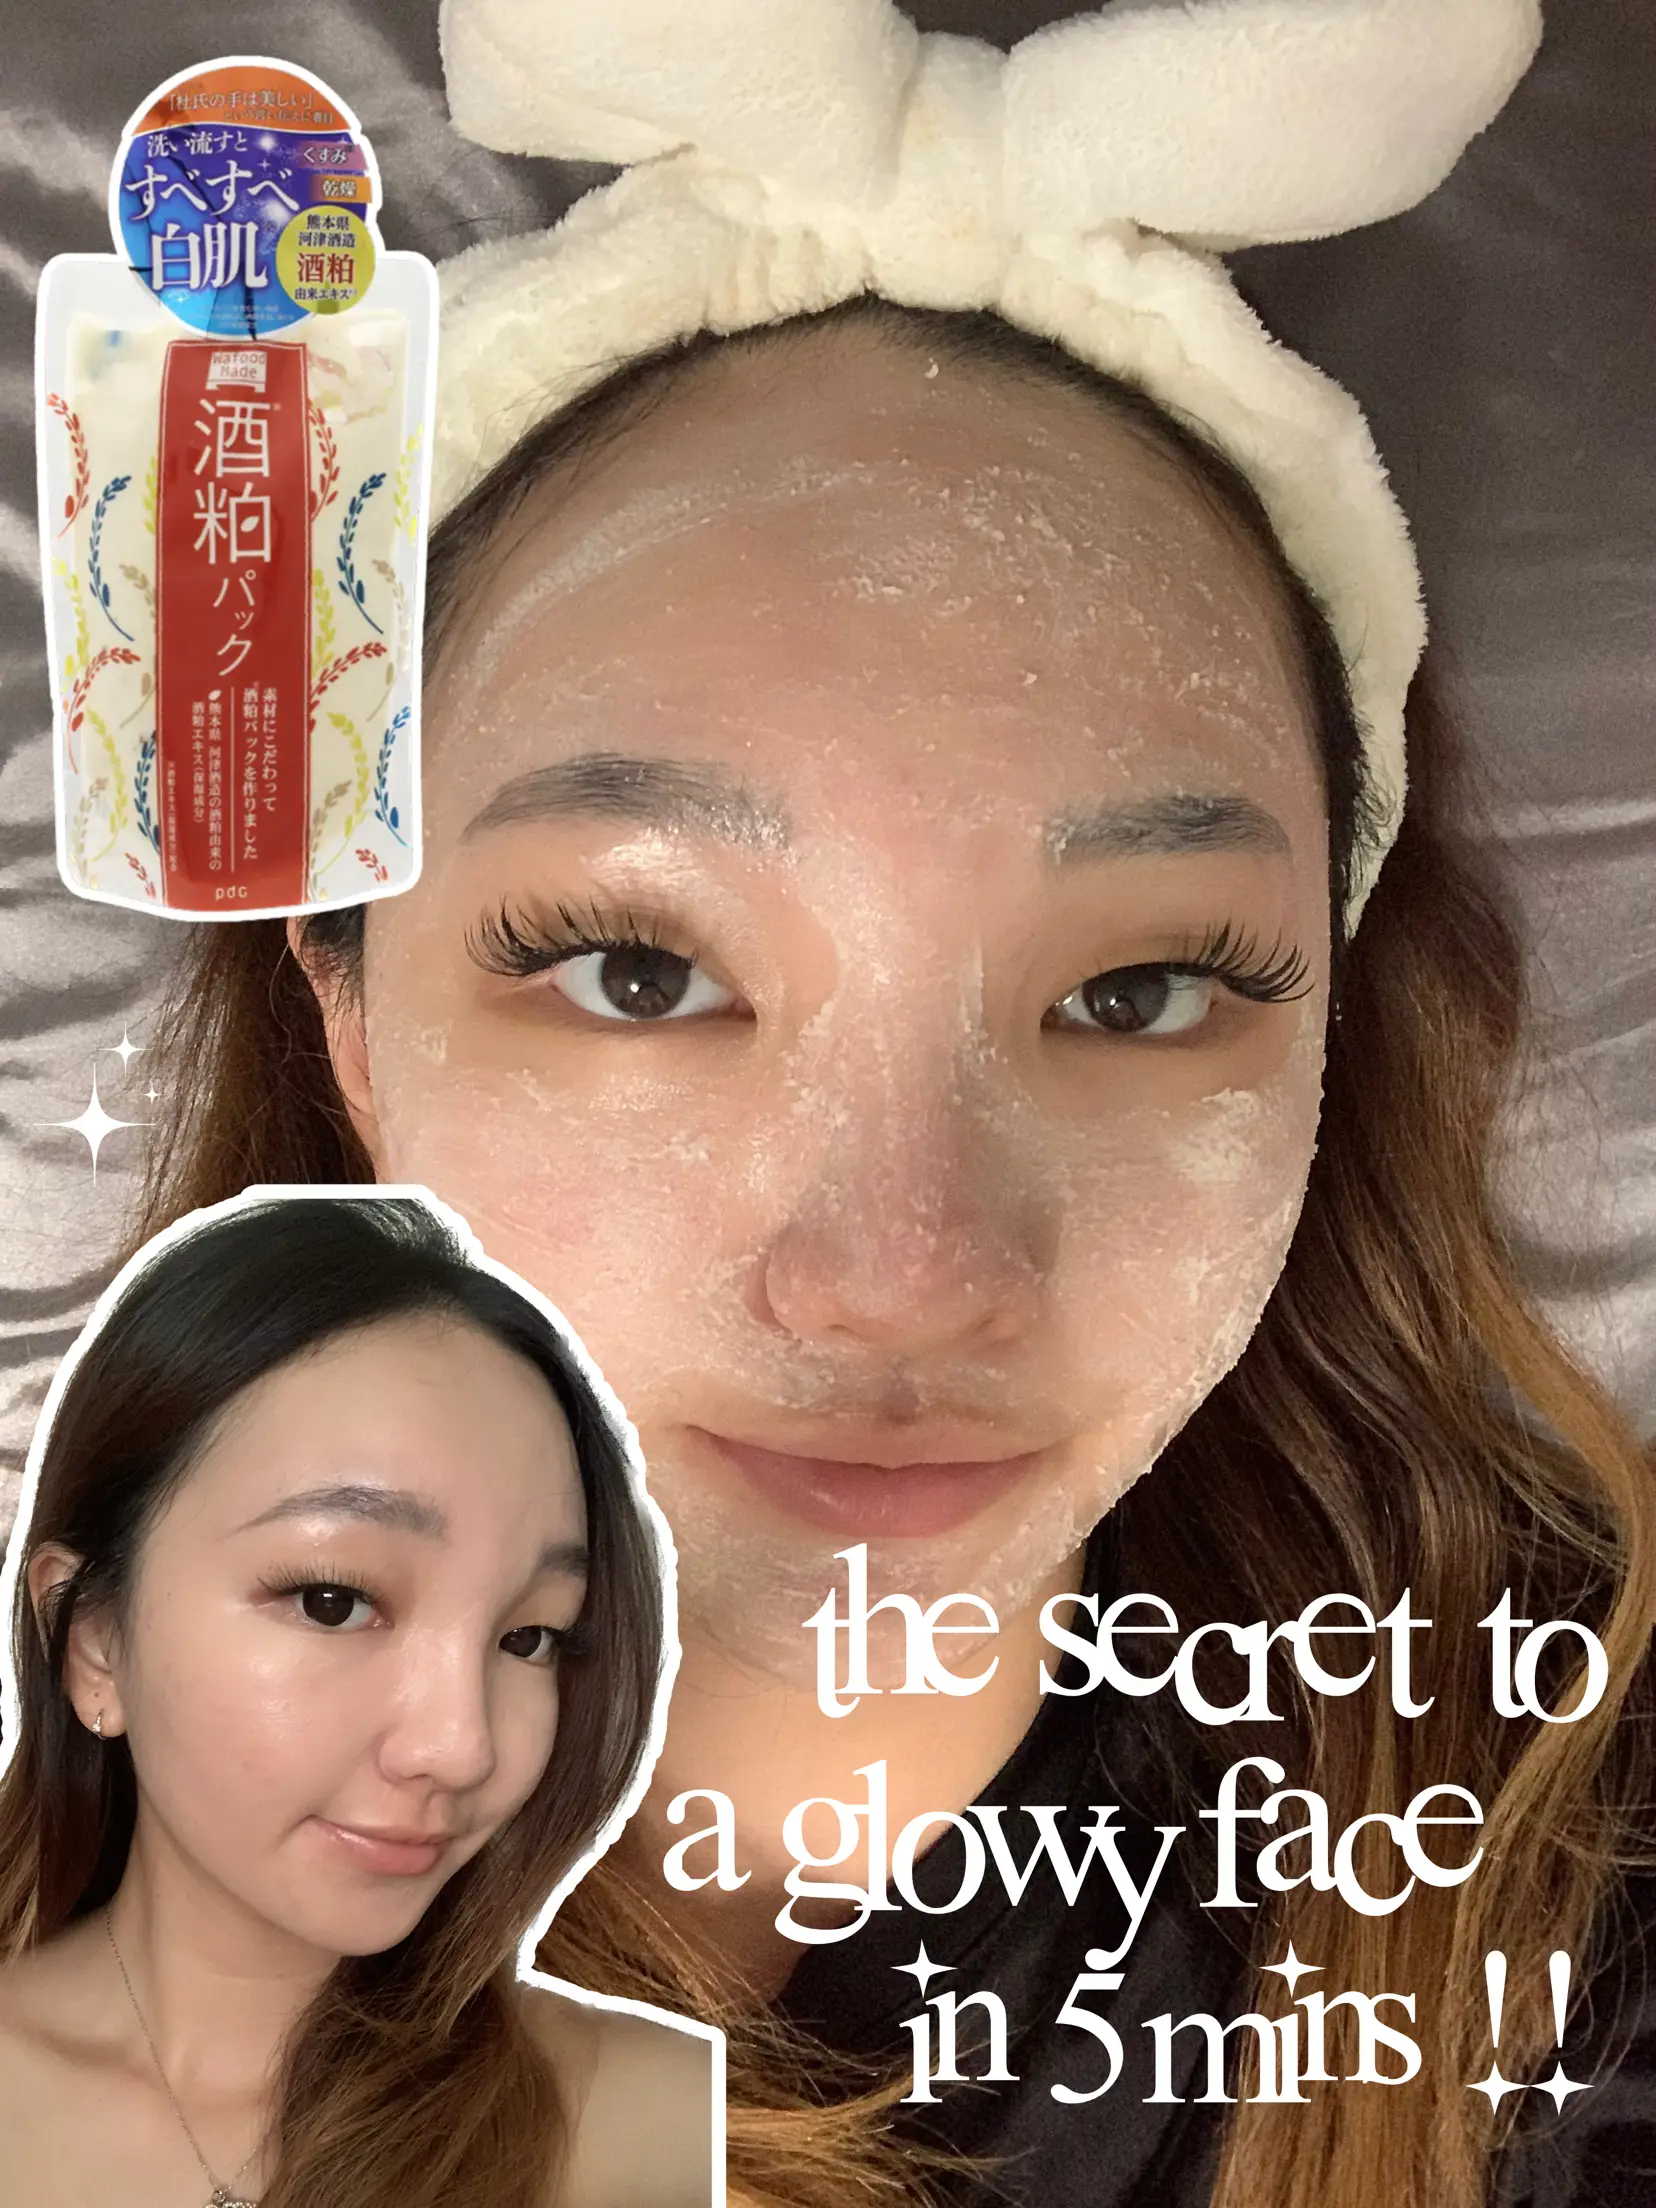 The secret to getting GLOWY SKIN in just 5 mins😚💕's images